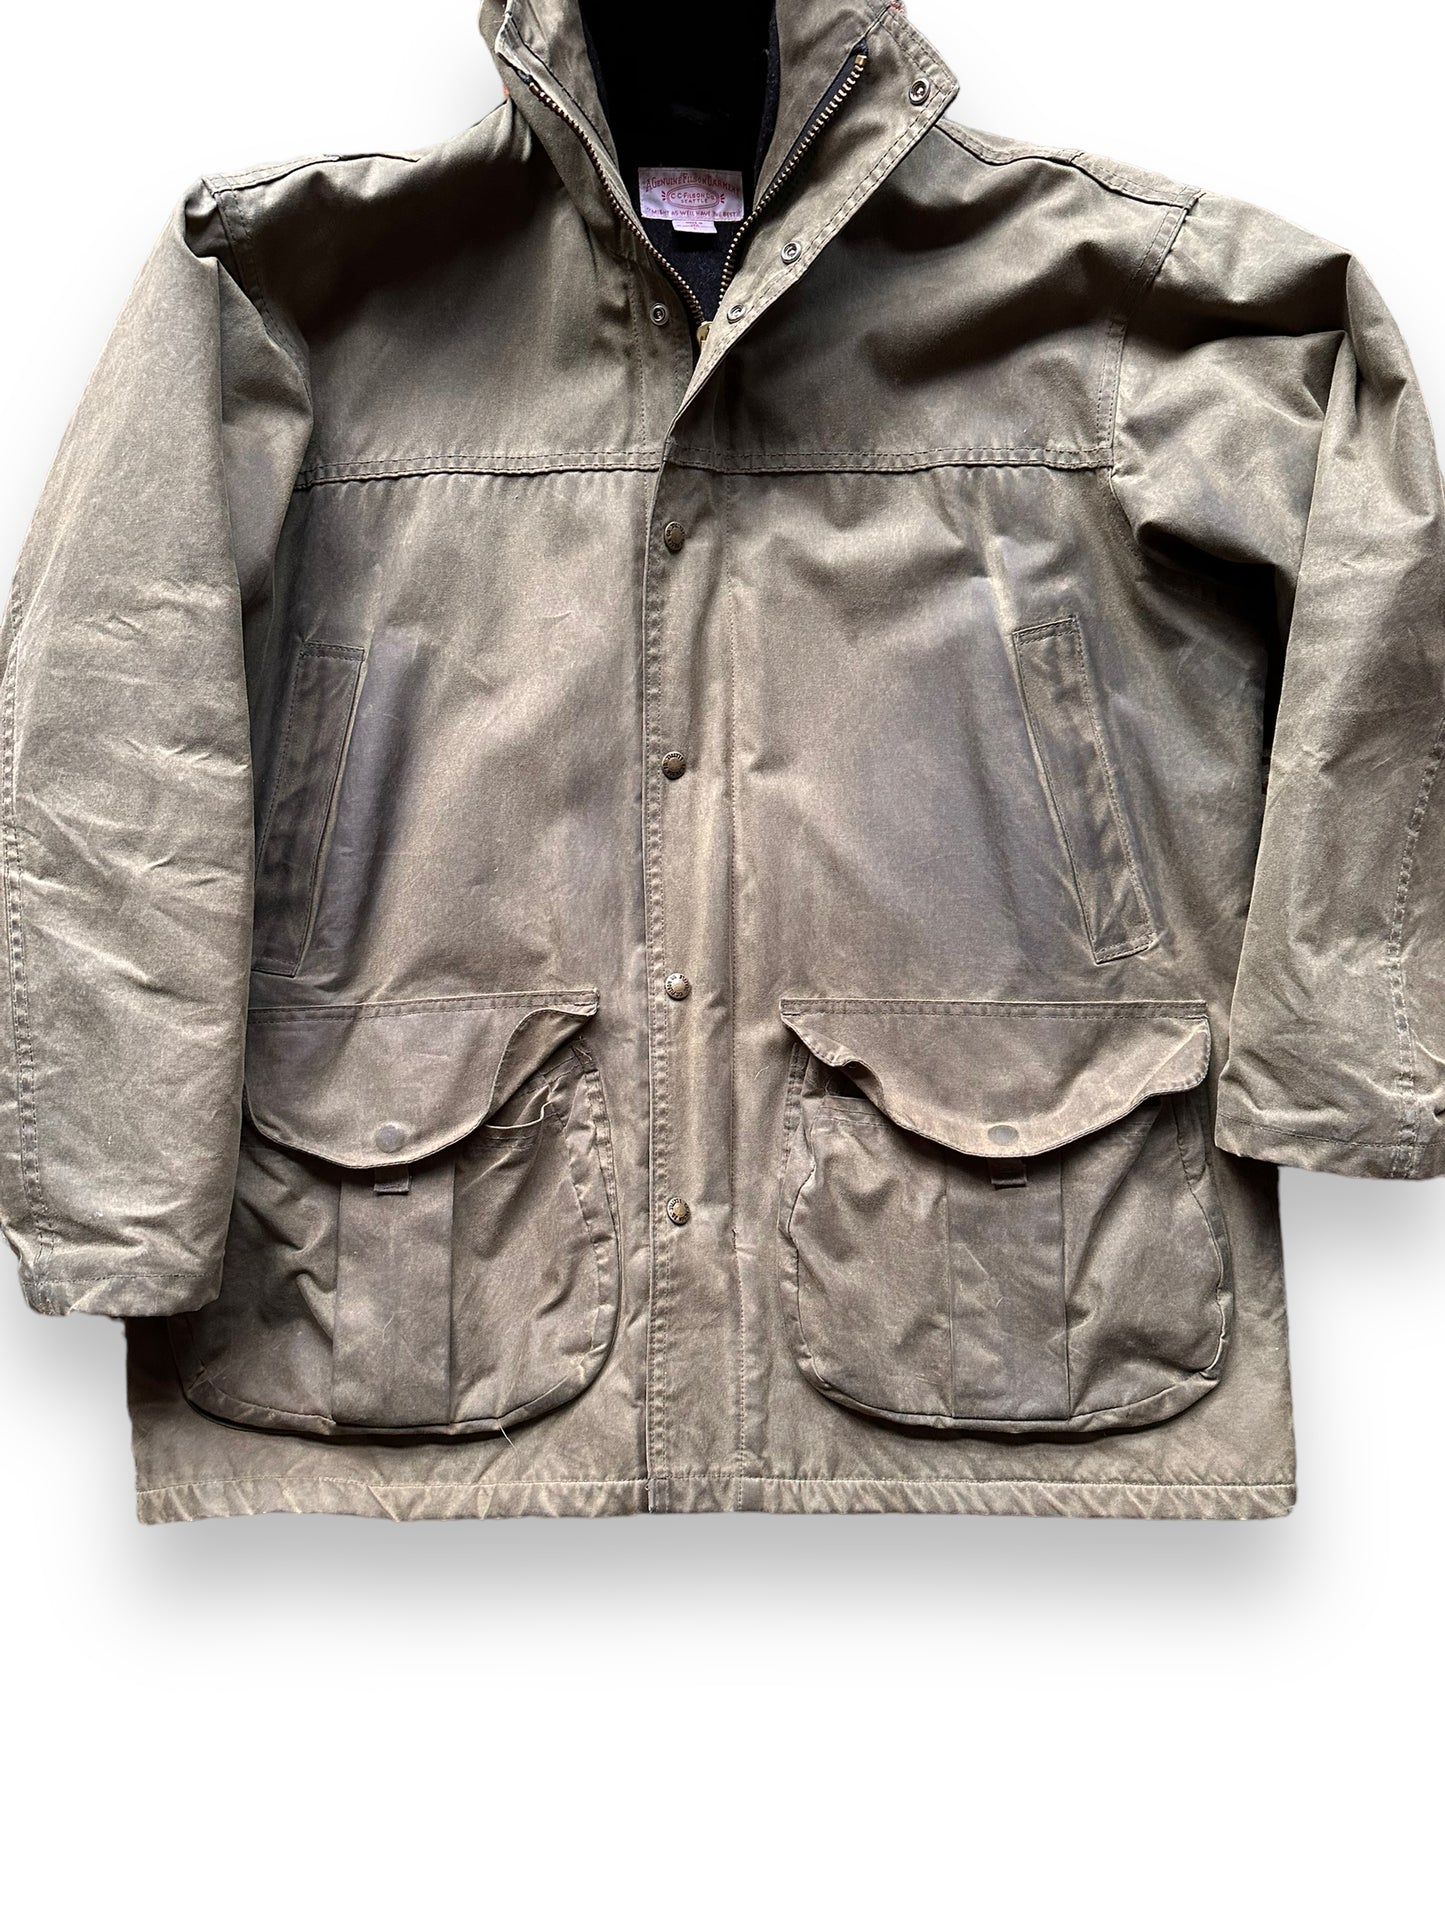 Lower Front View of Filson Foothills Parka SZ L |  Filson Tin Cloth Jackets Seattle | Barn Owl Vintage Clothing Seattle